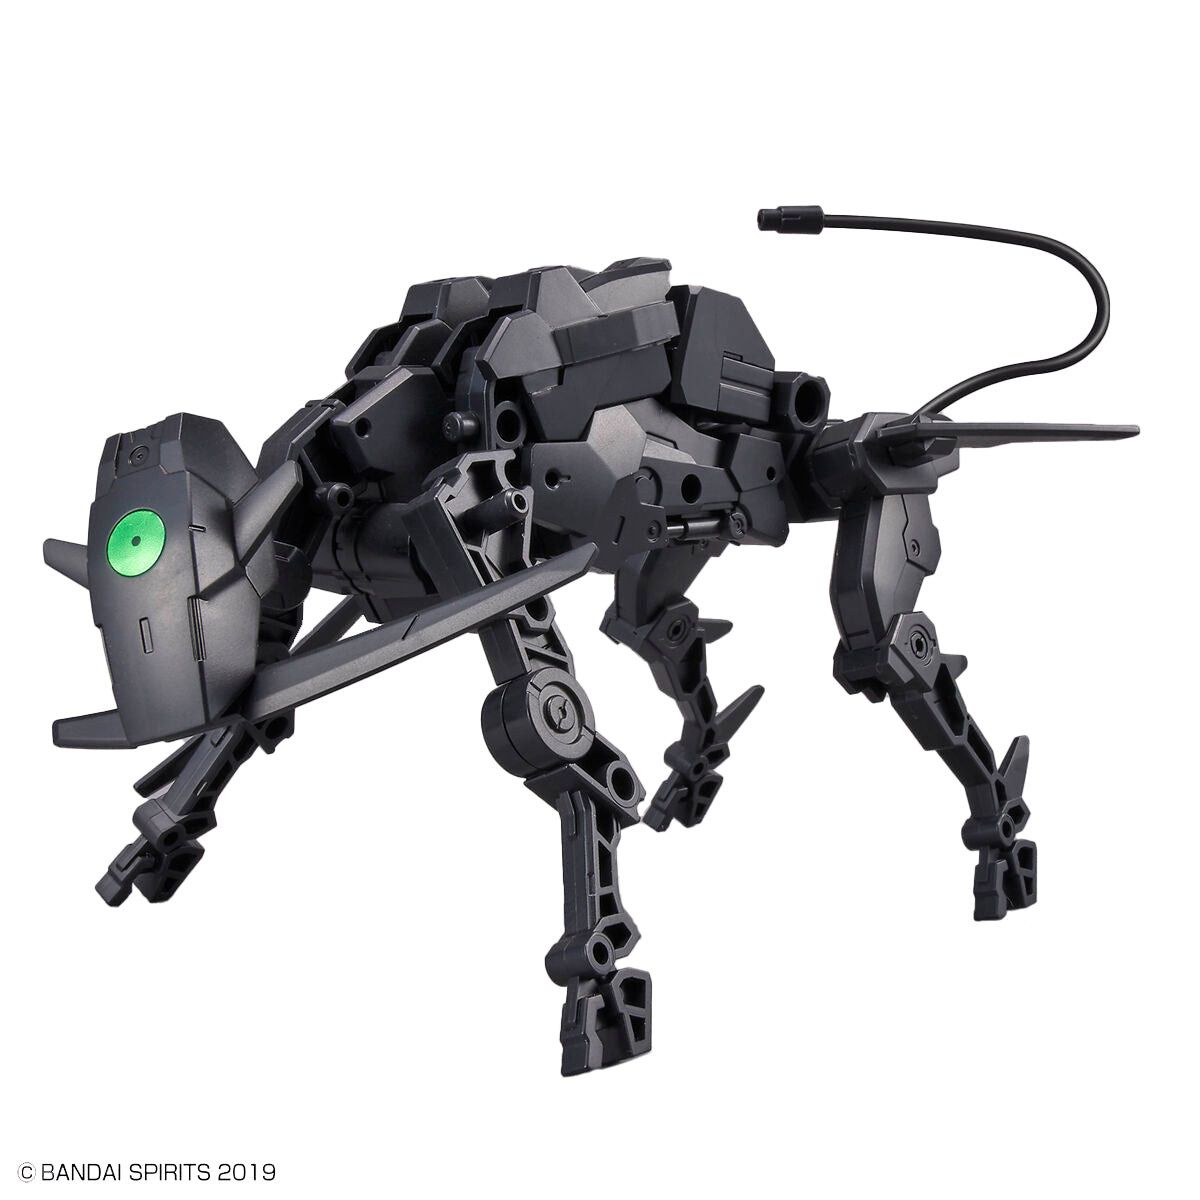 #10 Dog Mecha "30 Minute Missions" Extended Armament - Dirt Cheap RC SAVING YOU MONEY, ONE PART AT A TIME